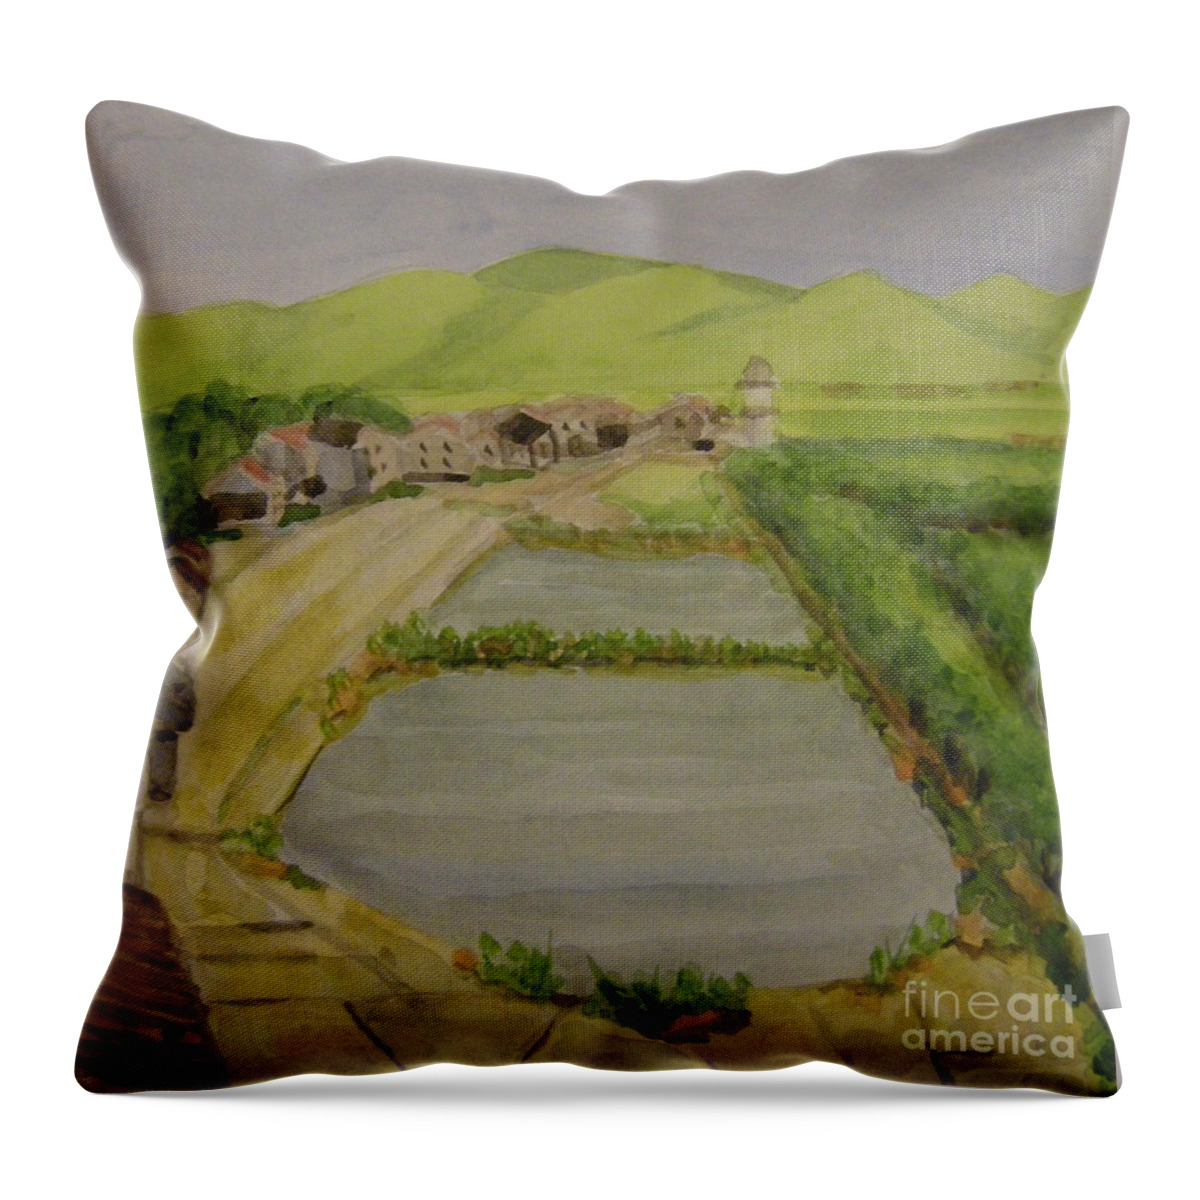 China Throw Pillow featuring the painting Fish Ponds by Lilibeth Andre